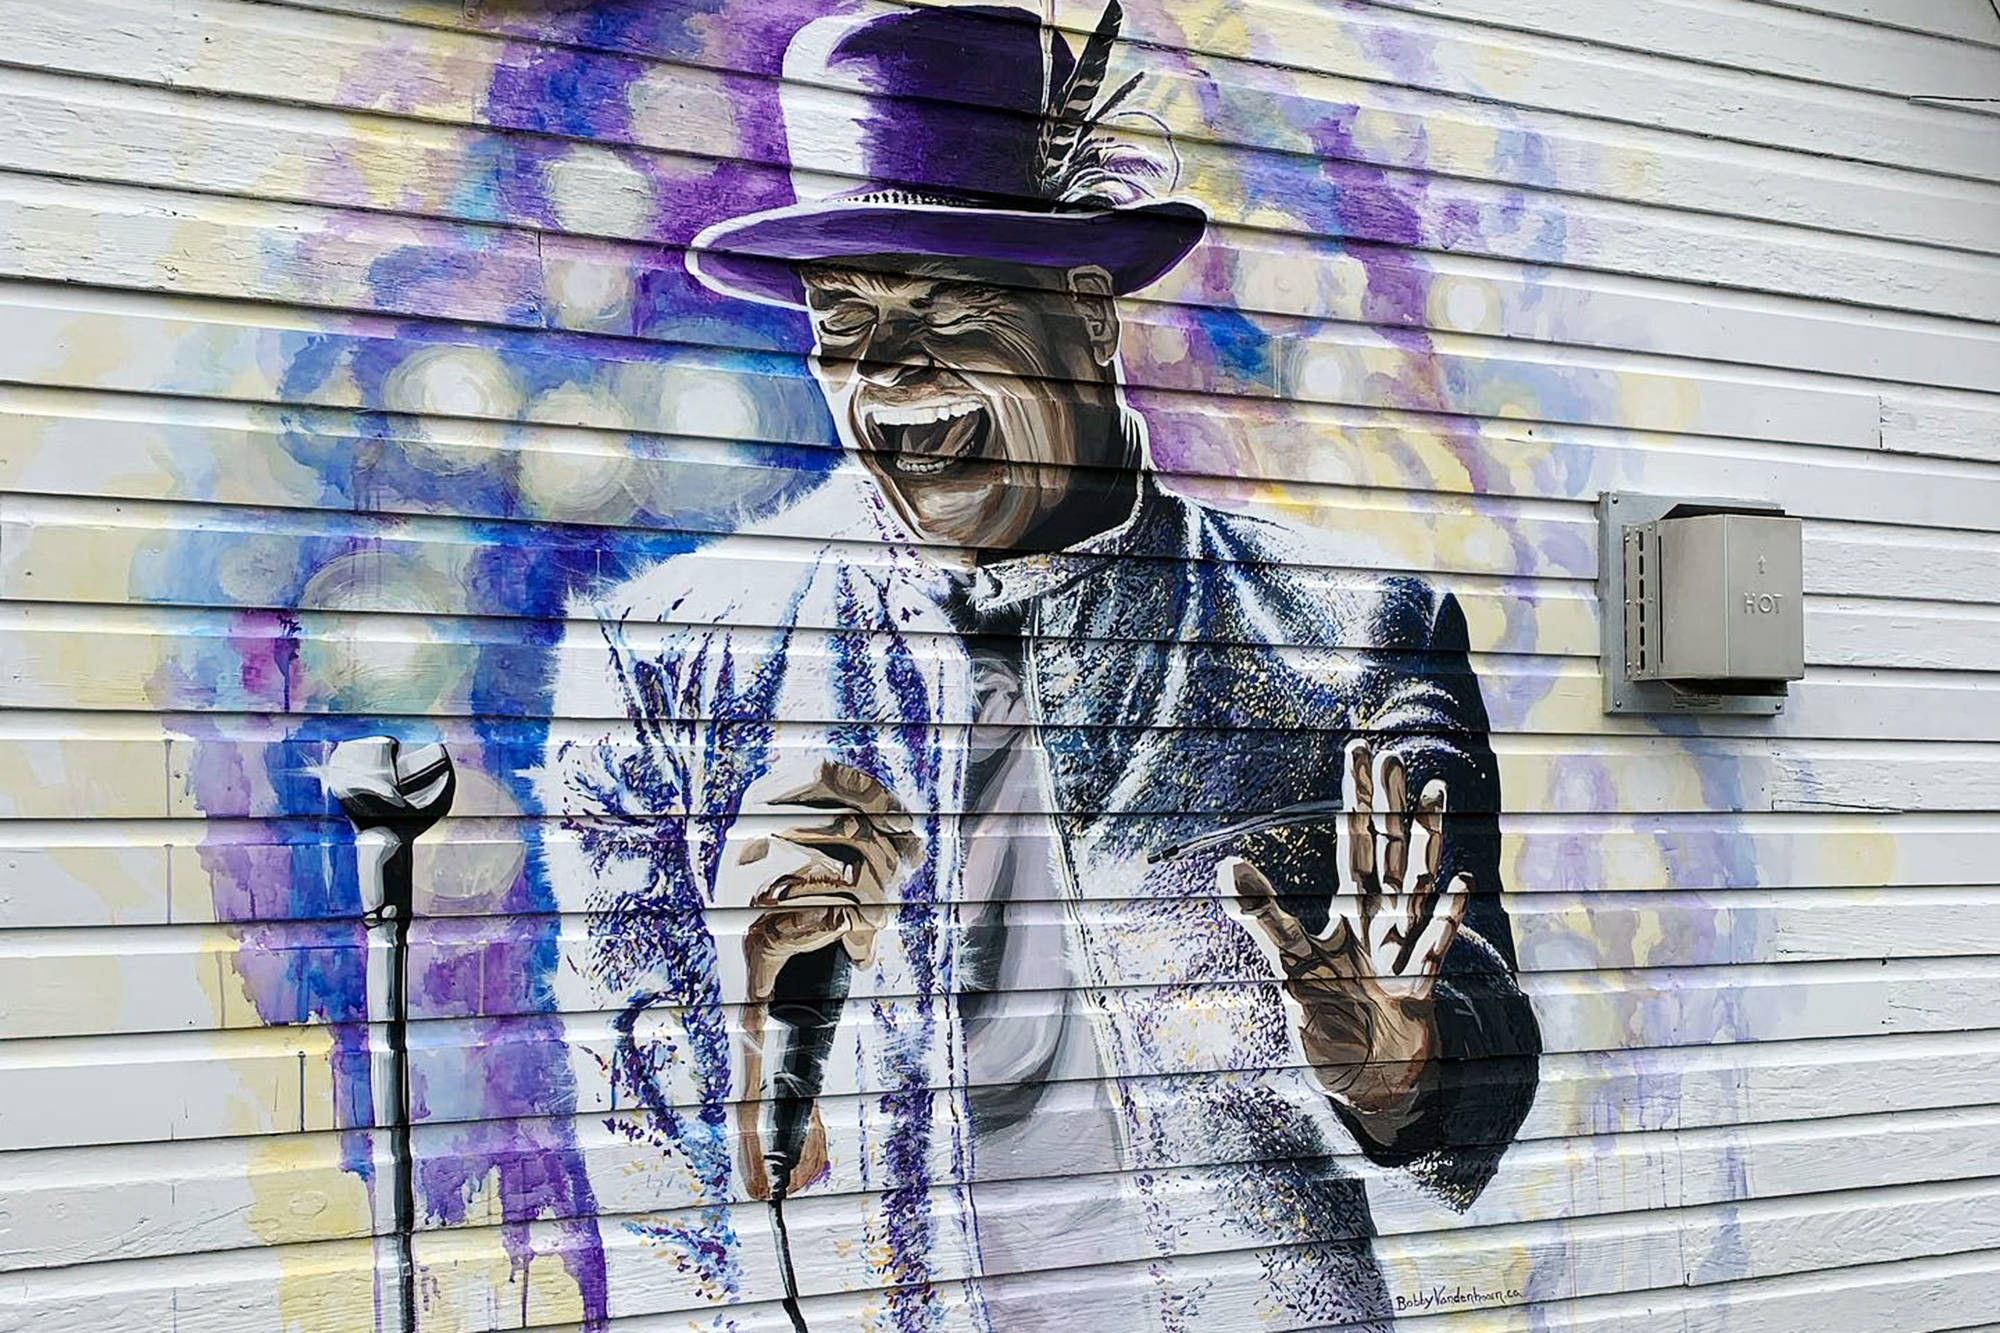 Kelowna artist Bobby Vandenhoorn recently completed mural of late Canadian rock icon and activist Gord Downie now adorns Brenda Dalzell’s Sicamous business, the Bruhn Crossing Urban Market. (Contributed)